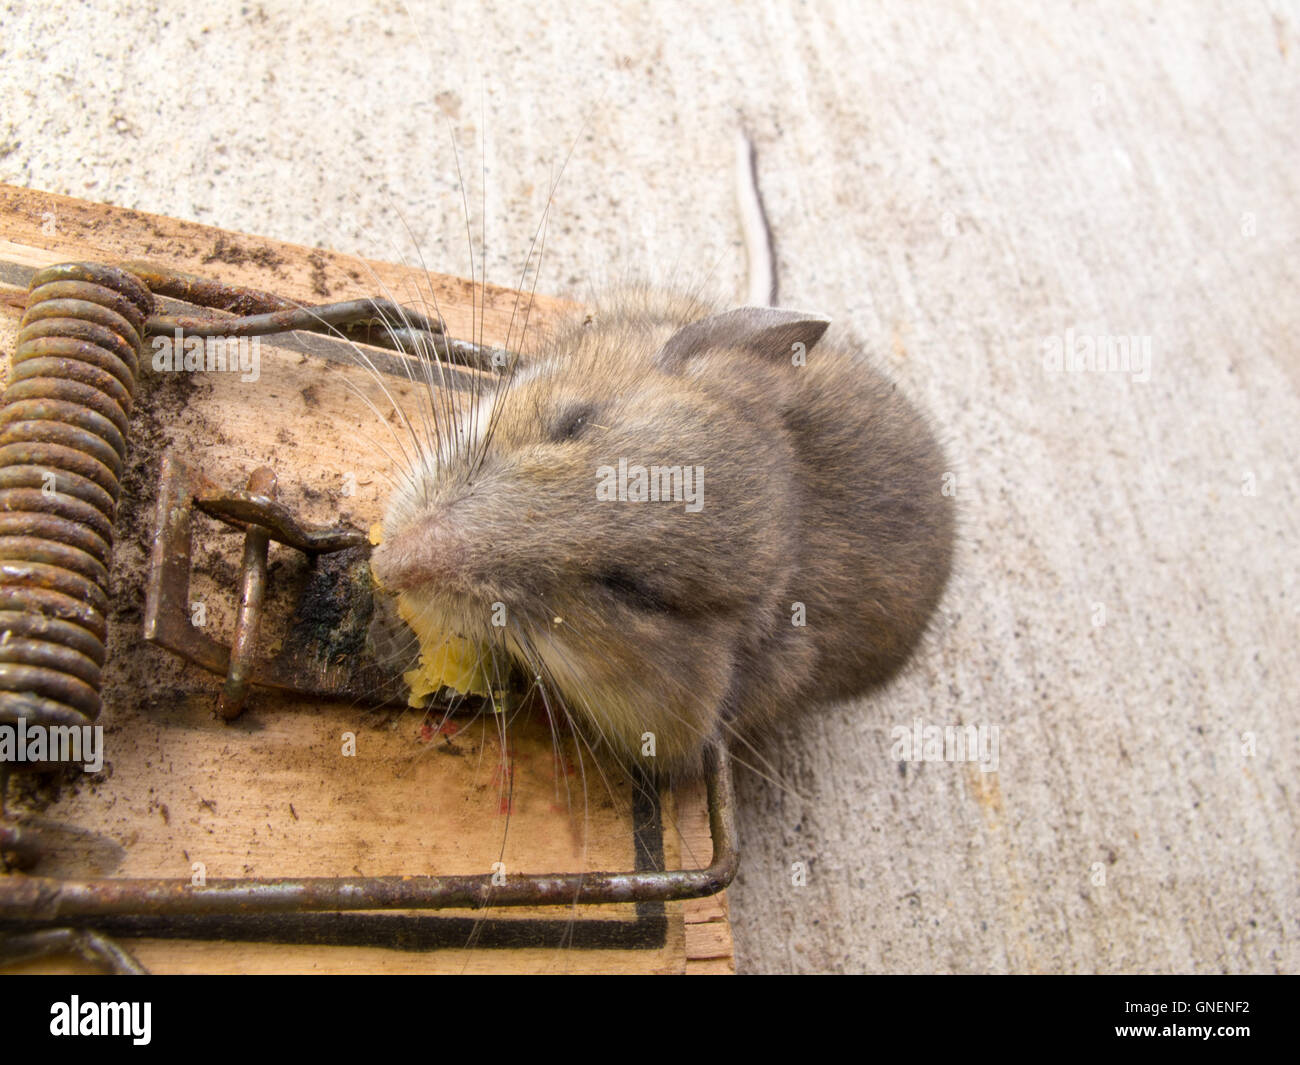 Mouse killed in a metal mouse trap Stock Photo - Alamy